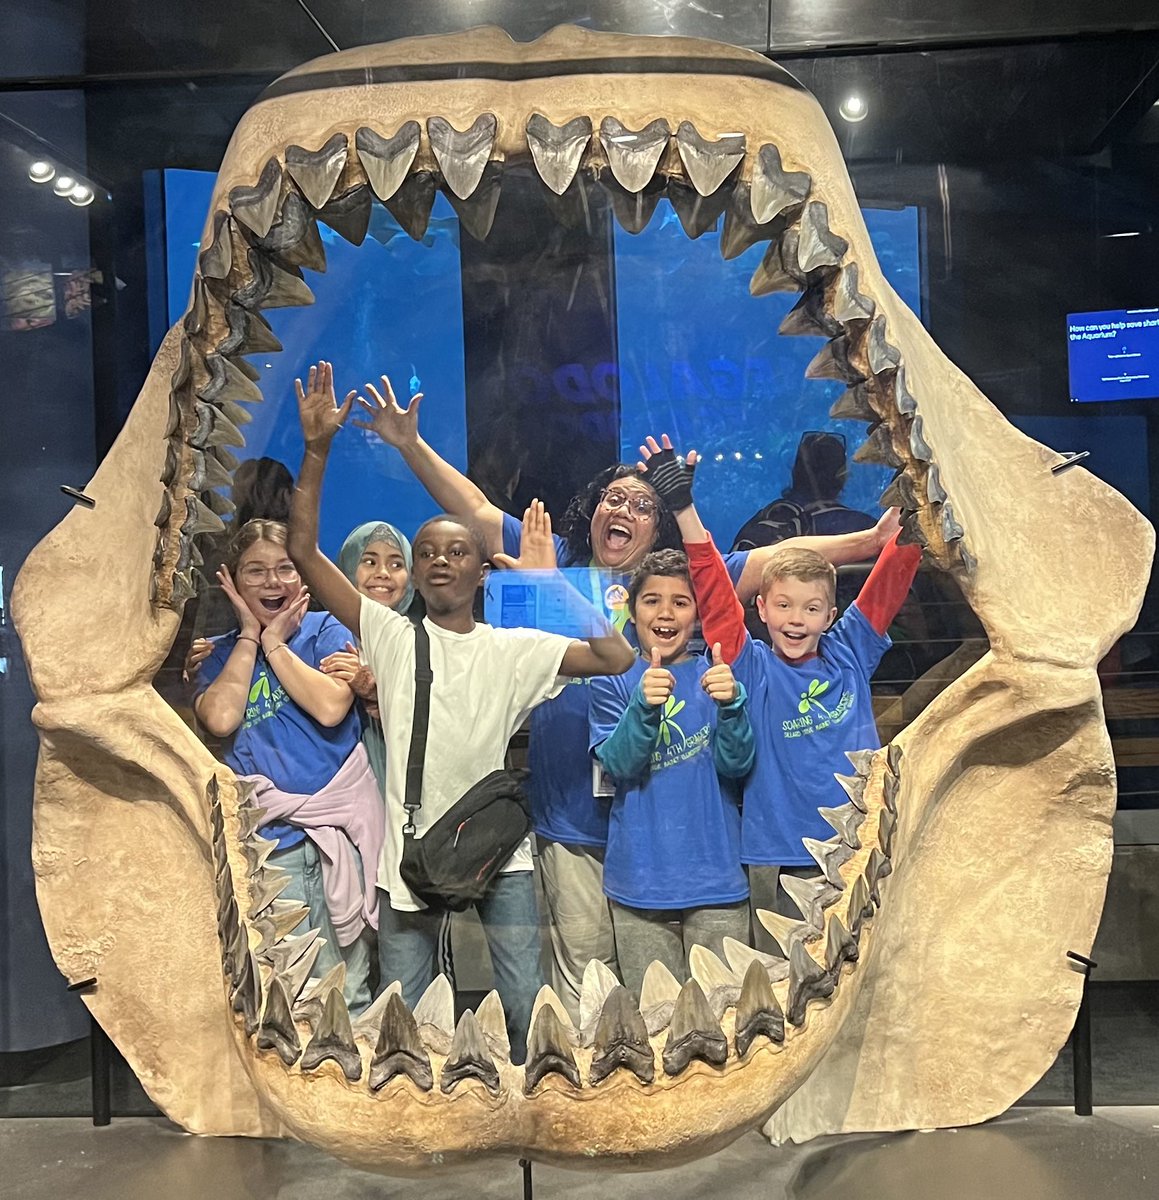 Our fourth graders had an incredible experience at the Fort Fisher Aquarium! @rsykez @WesternWCPSS @MollyMo518 @guillenDillard